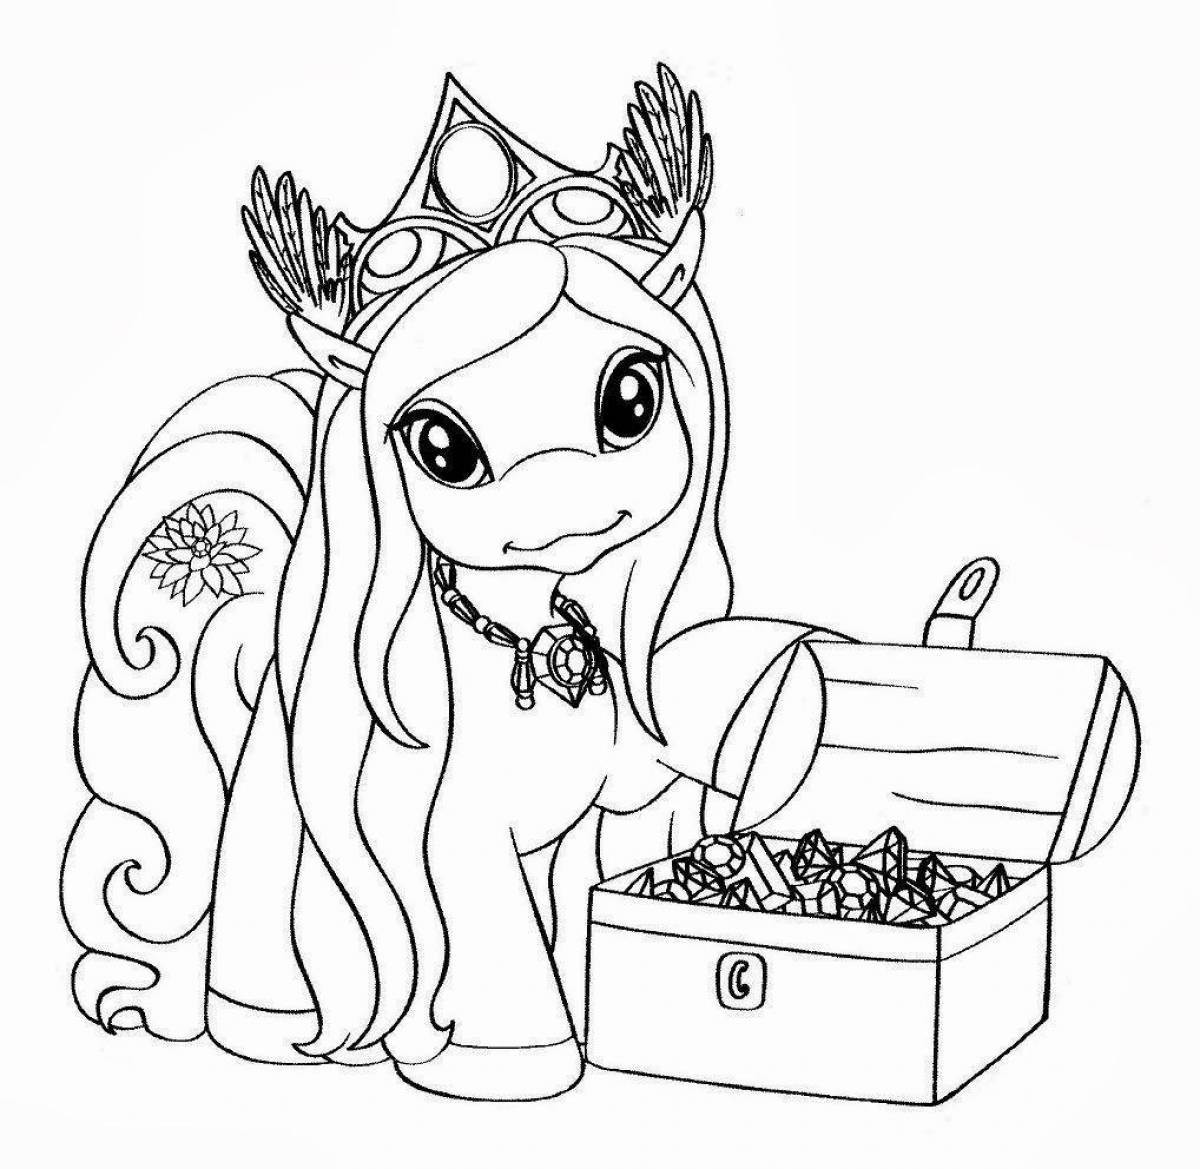 Incredible unicorn coloring book for girls